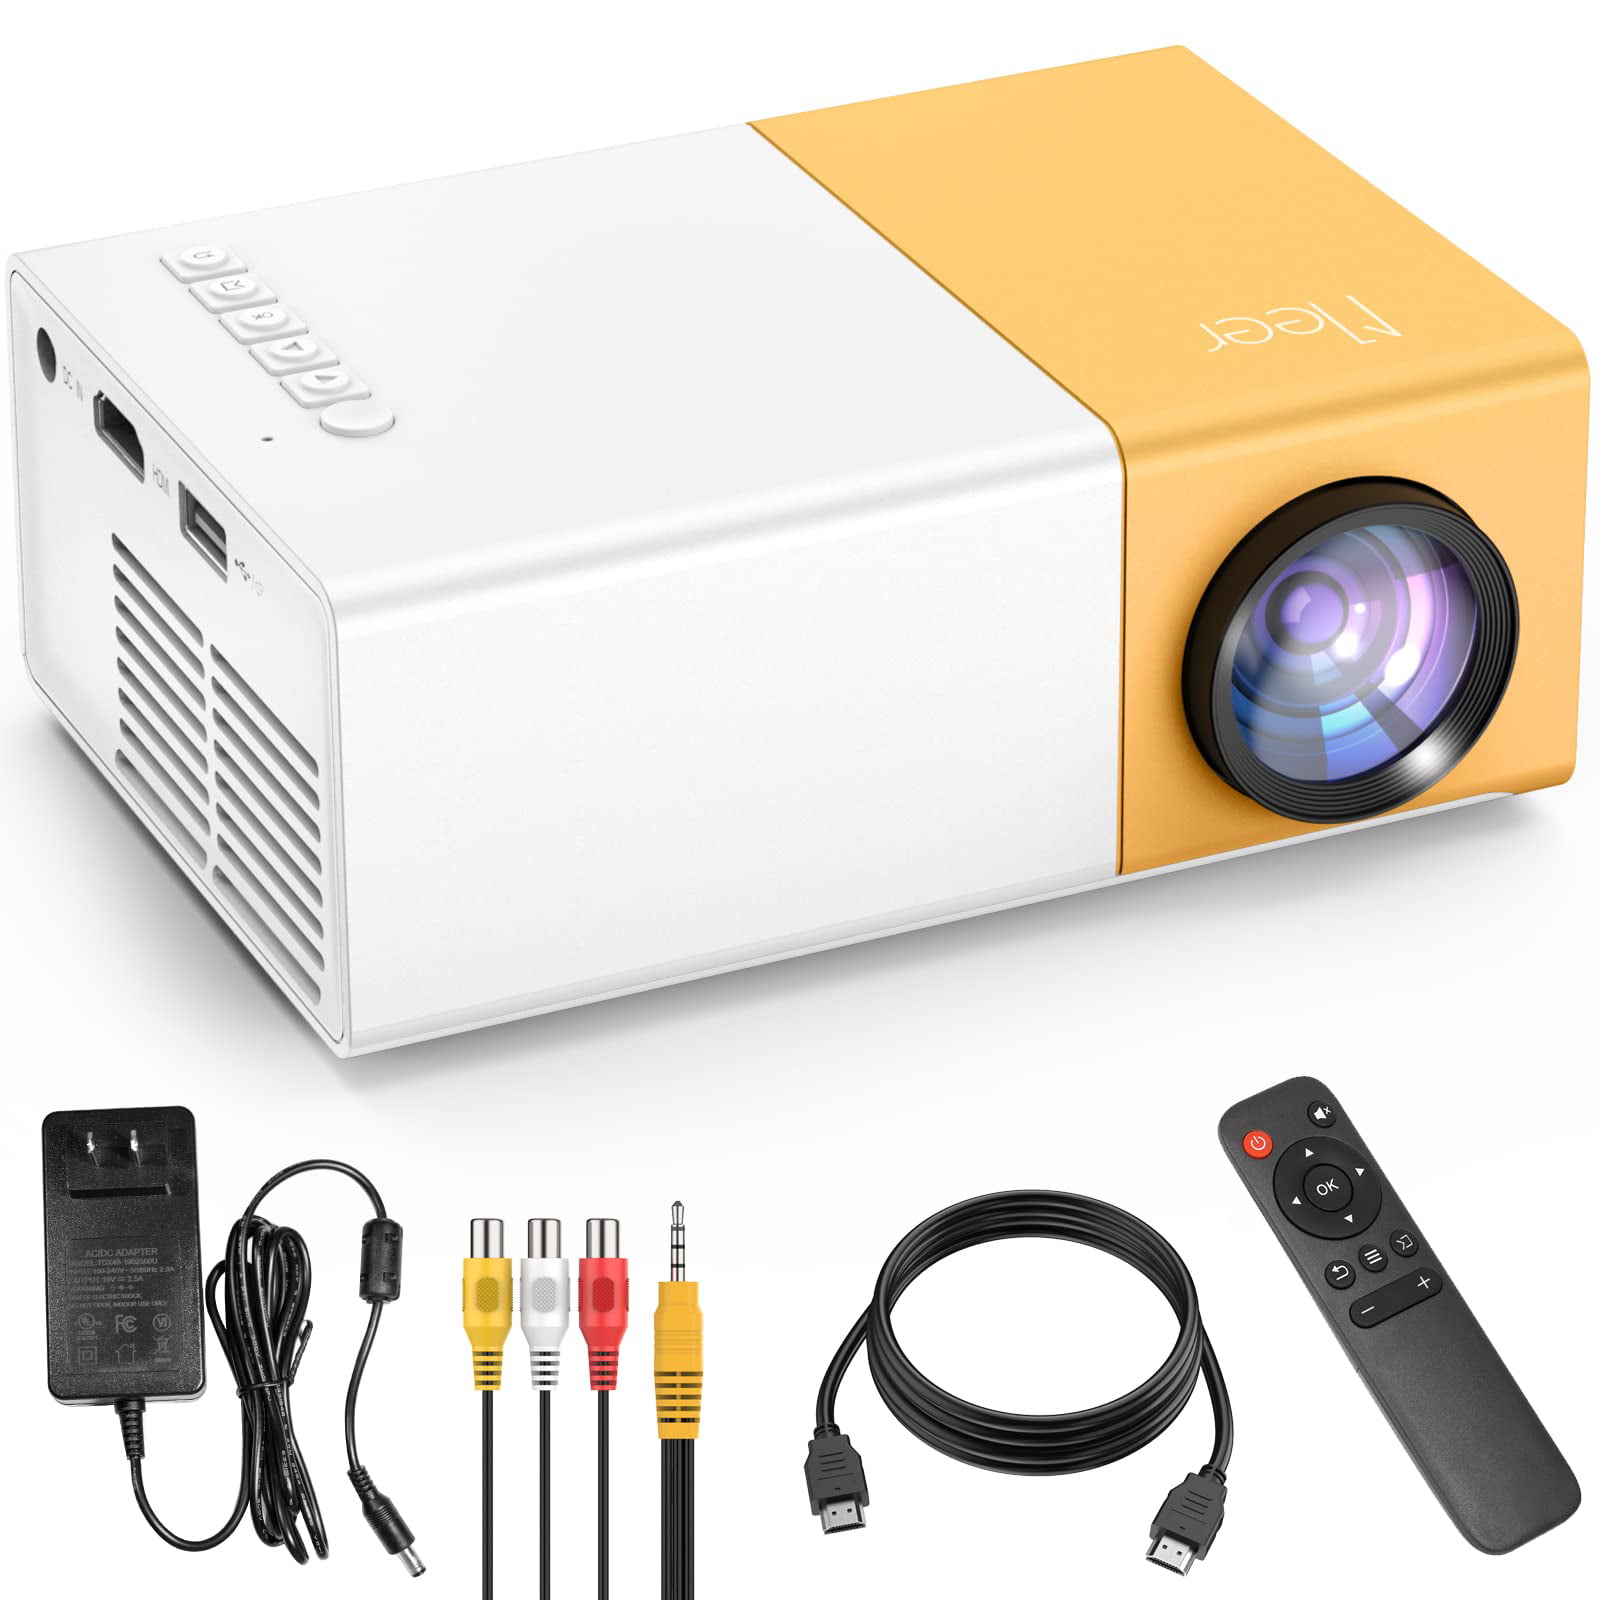  Meer Mini Projector,Portable Movie Projector,Smart Home  Projector,Neat Projector for  iOS,Android,Windows,PS5,Laptop,TV-Stick,Compatible with HDMI,USB,Audio,TF  Card,AV and Remote Control : Electronics